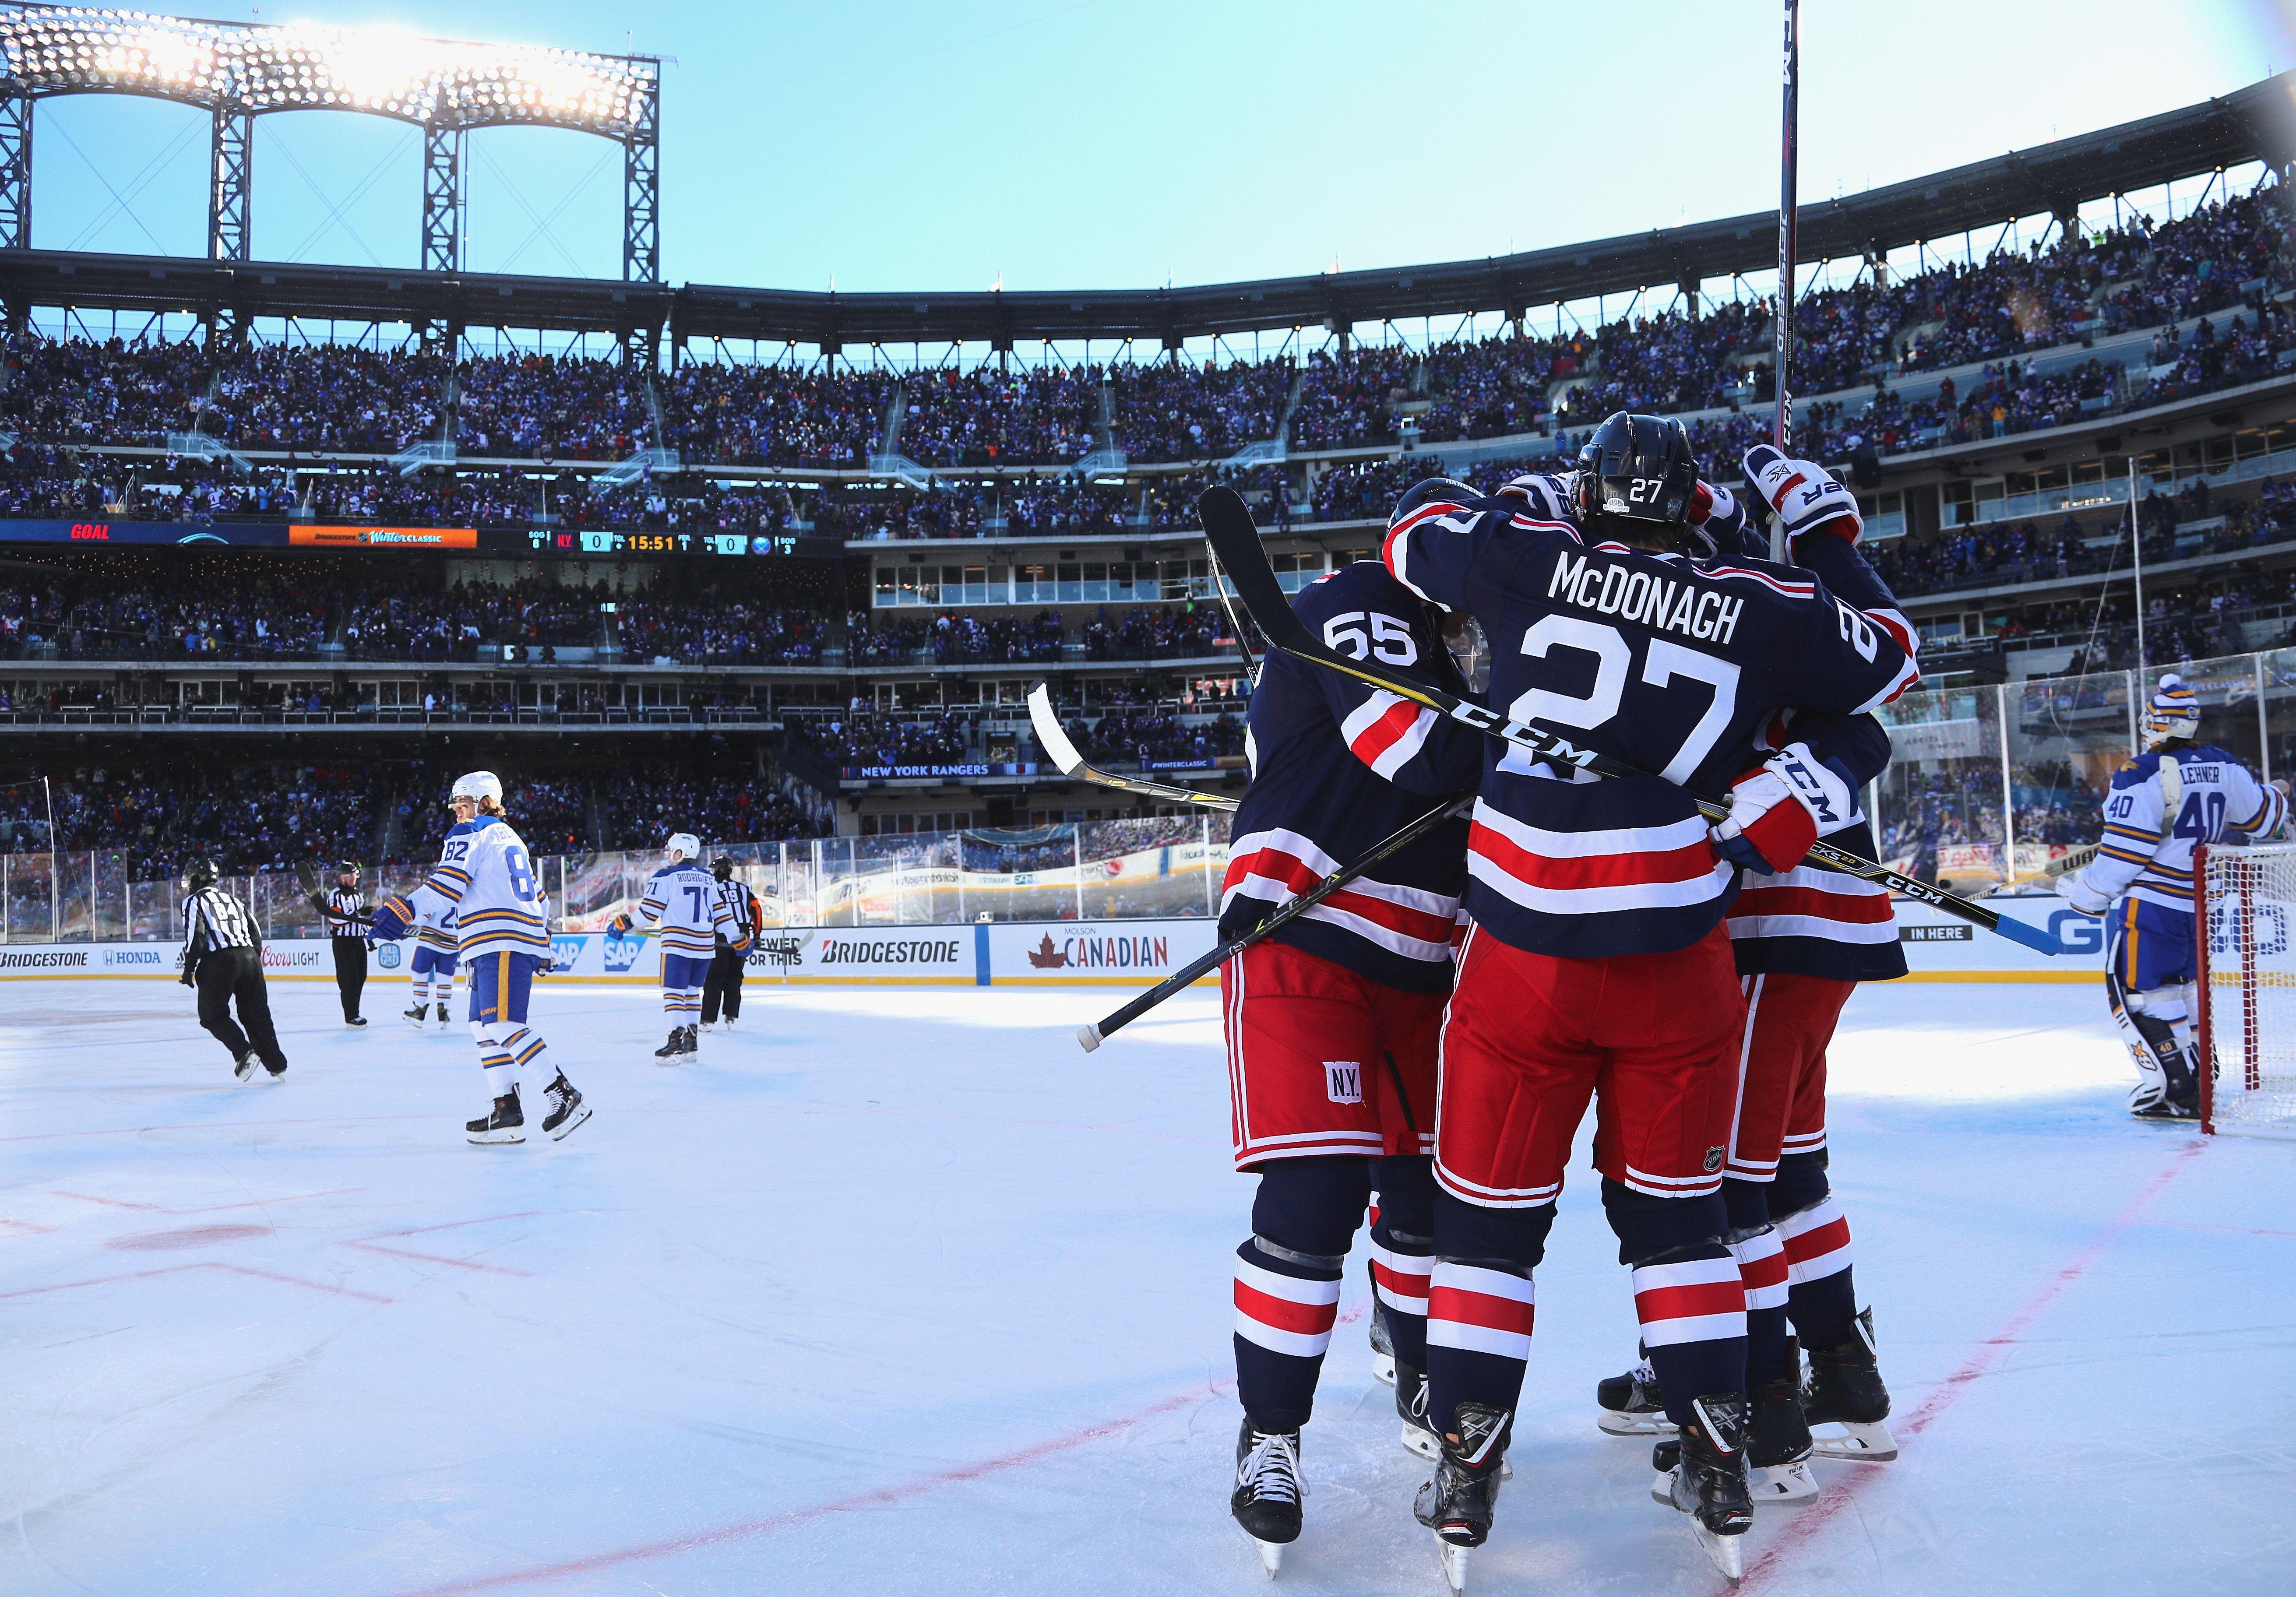 Winter Classic: The best outdoor photo of the Sabres vs